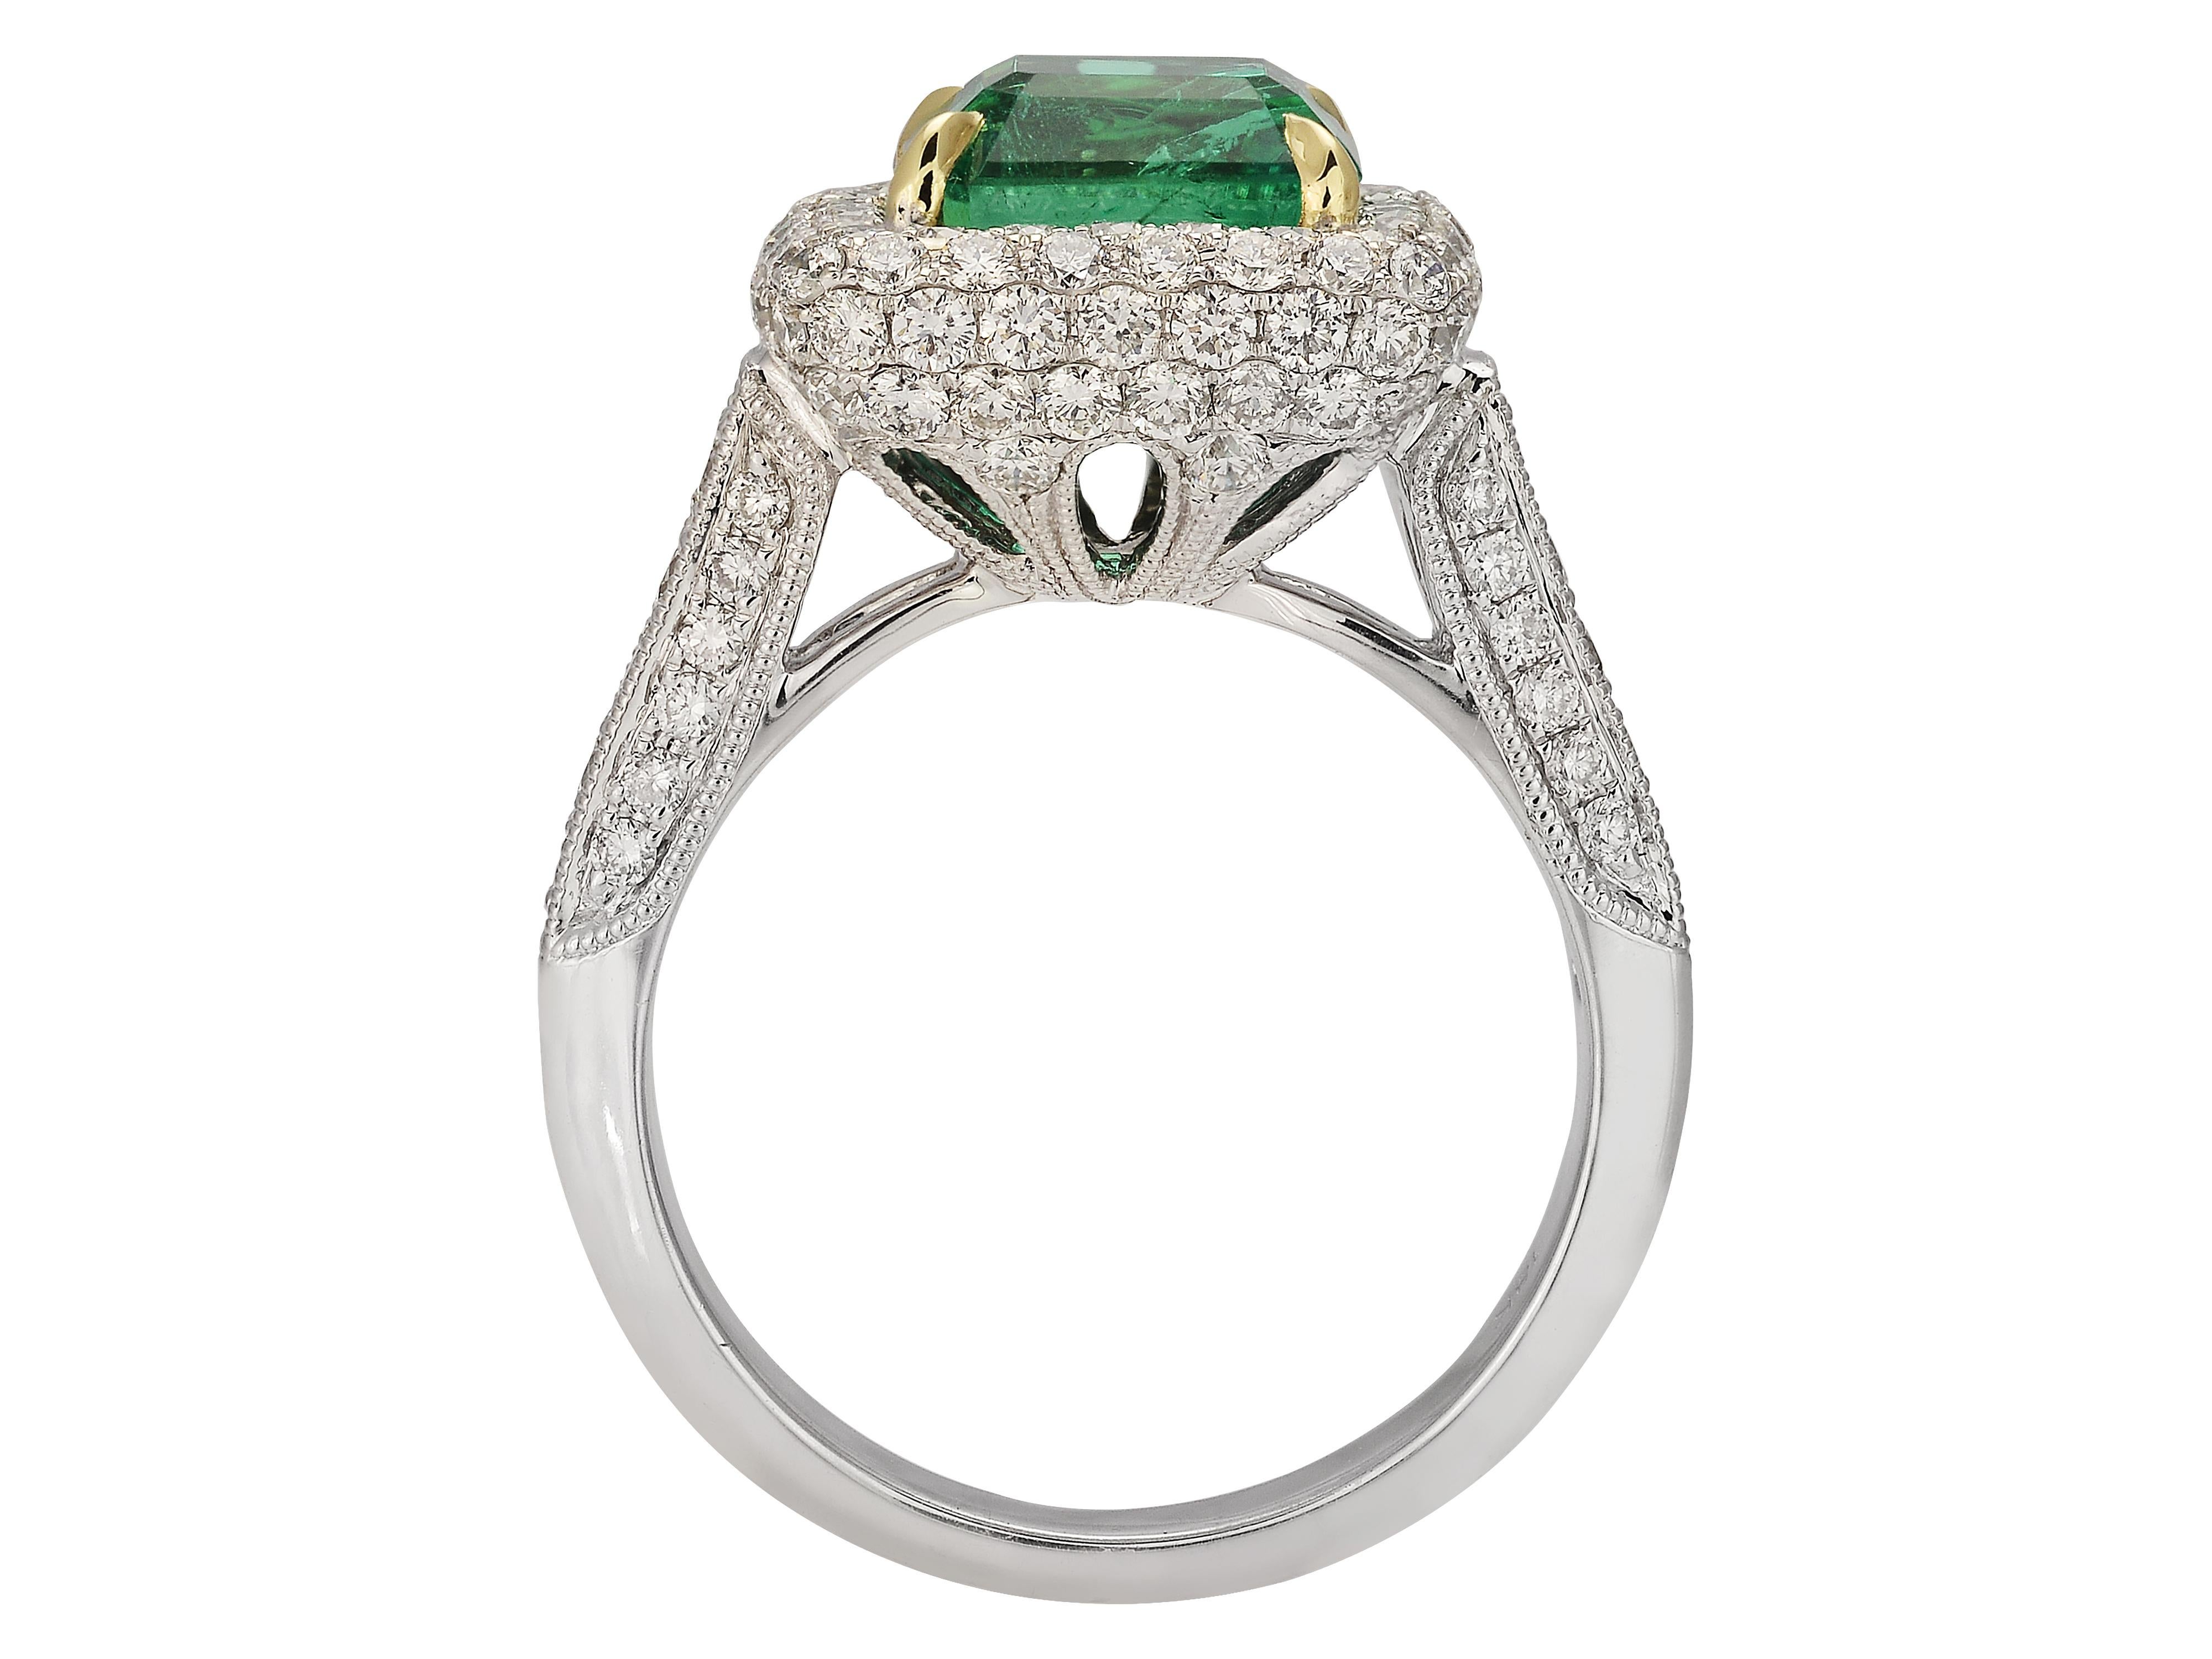 Emerald Cut 3.13 Carat Colombian Emerald Cocktail Ring